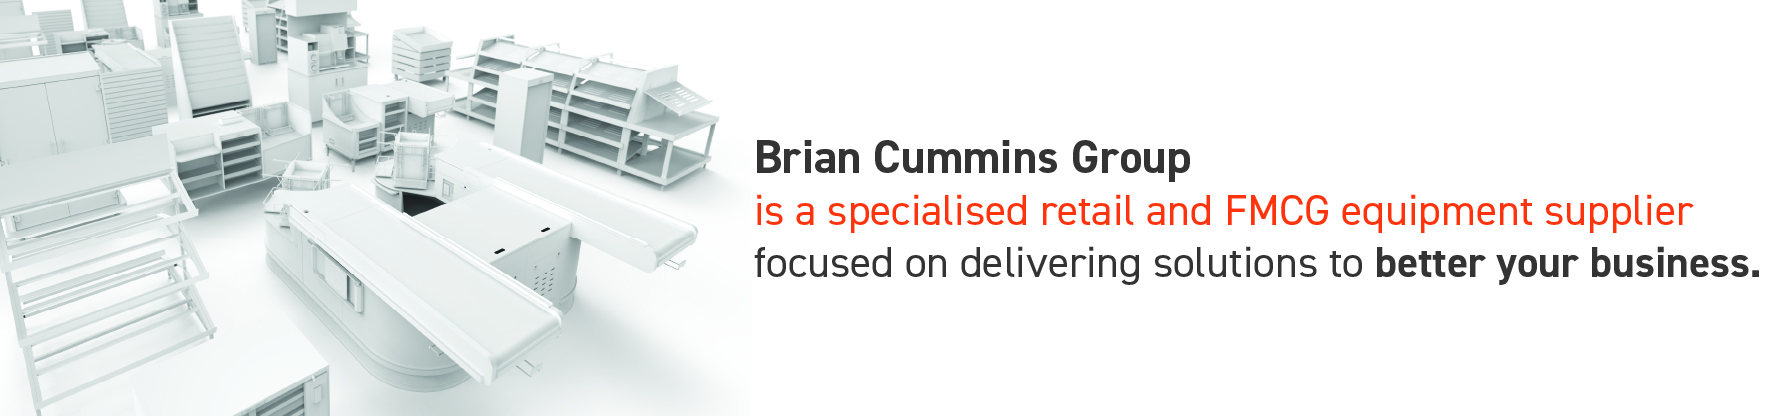 Brian Cummins Group  is a specialised retail and FMCG equipment supplier  focused on delivering solutions to better your business. 